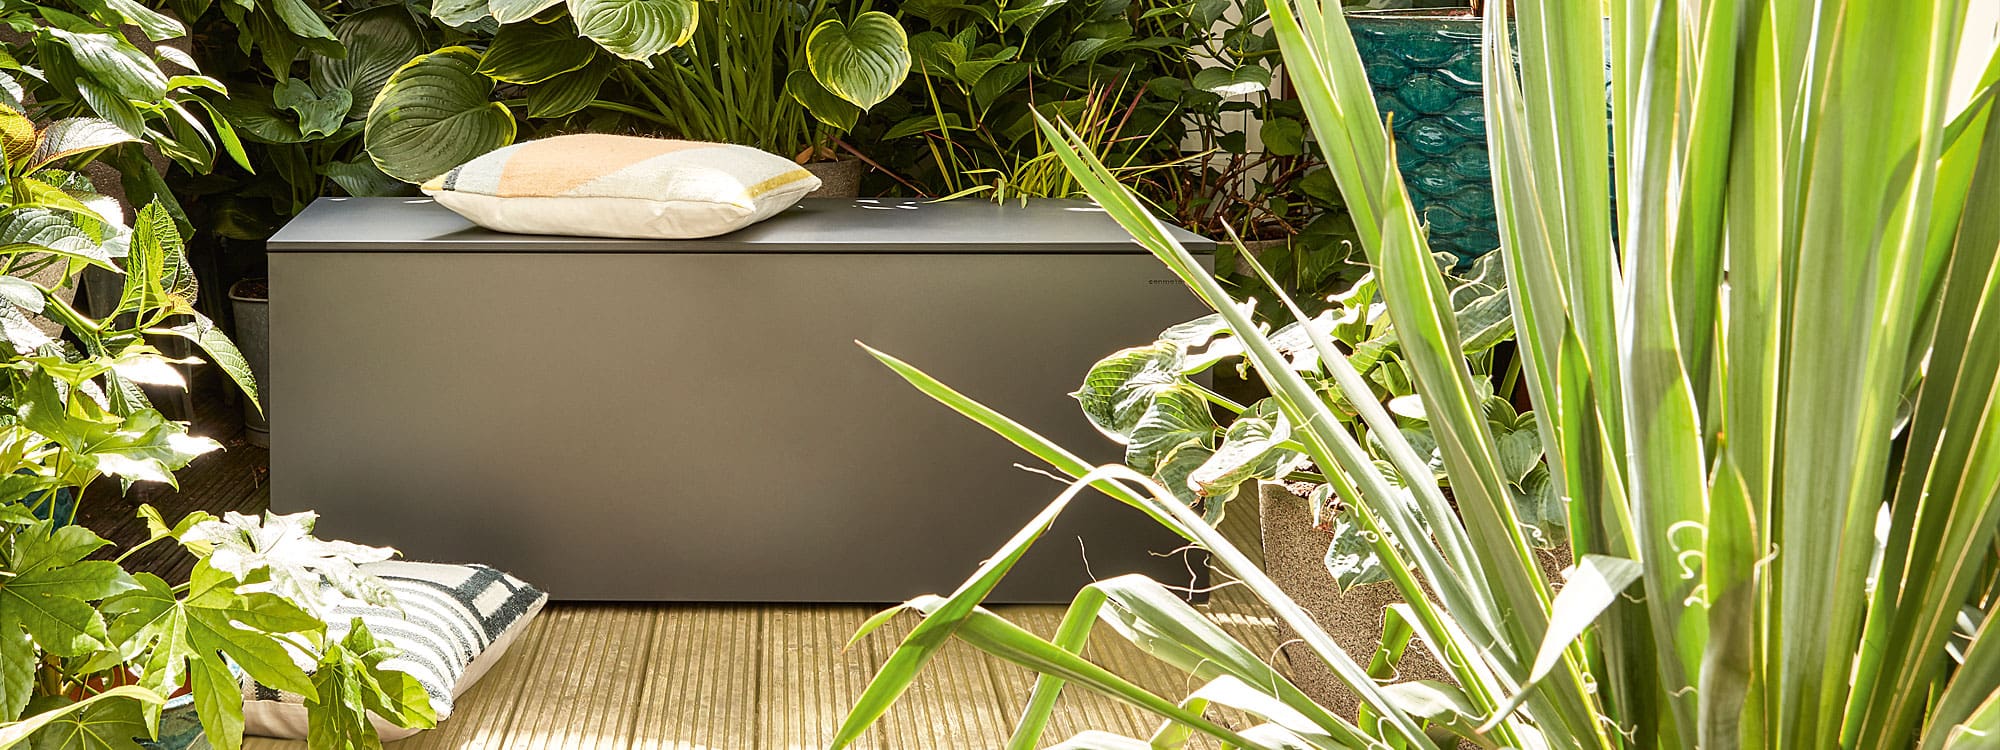 Image of El Pecho anthracite outdoor cushion box by Conmoto, shown on wooden decking surrounded by exotic plants